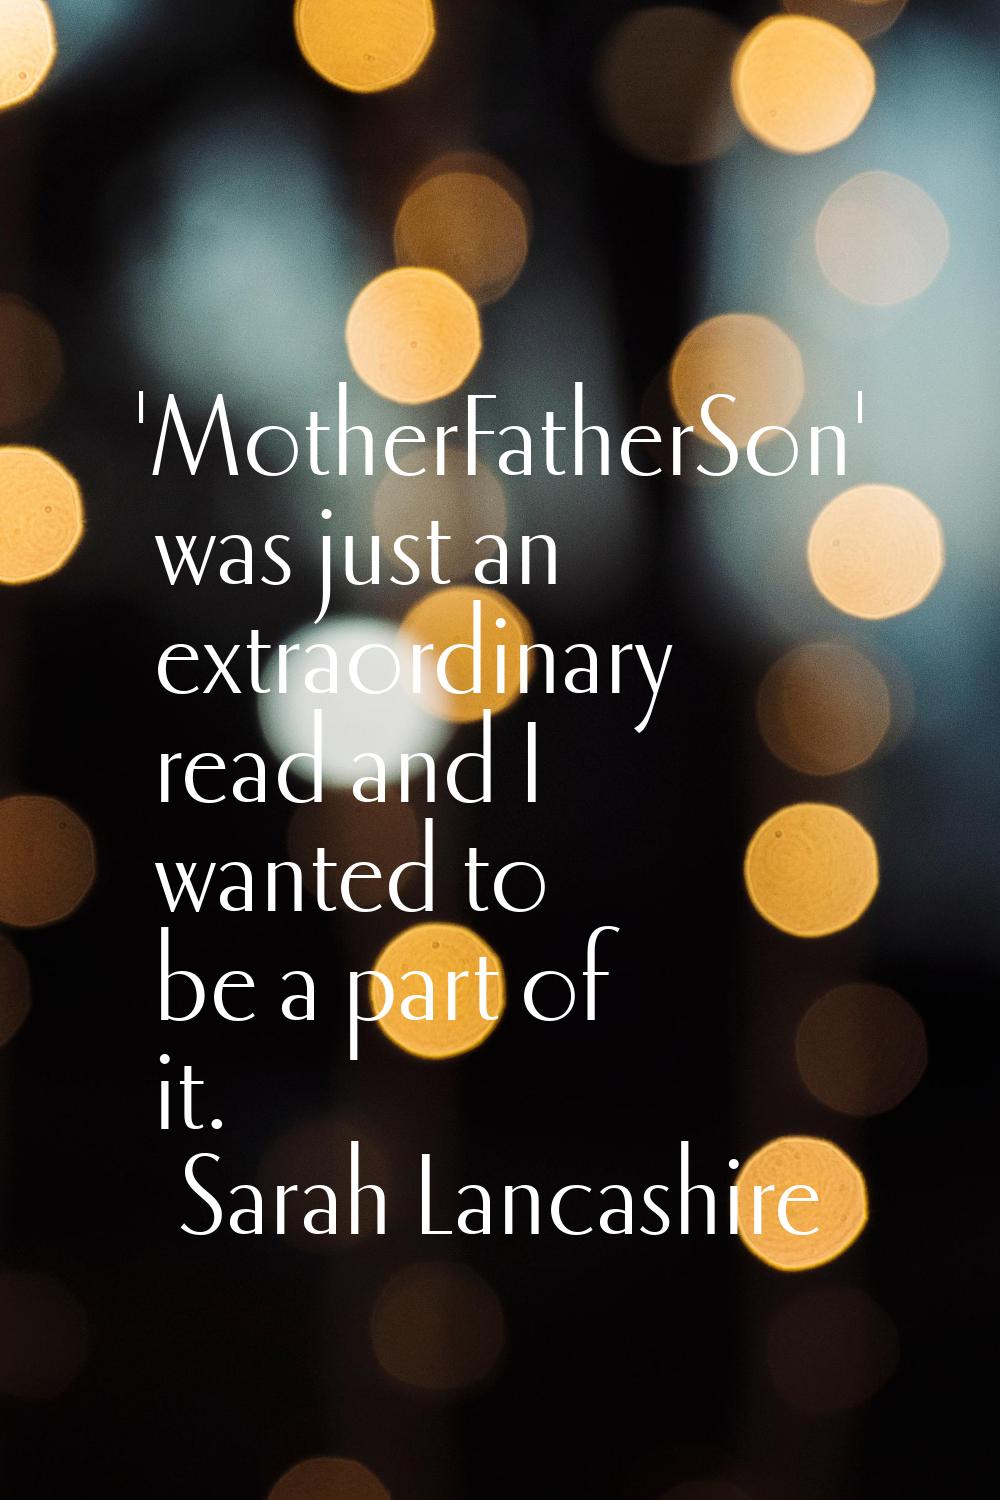 'MotherFatherSon' was just an extraordinary read and I wanted to be a part of it.